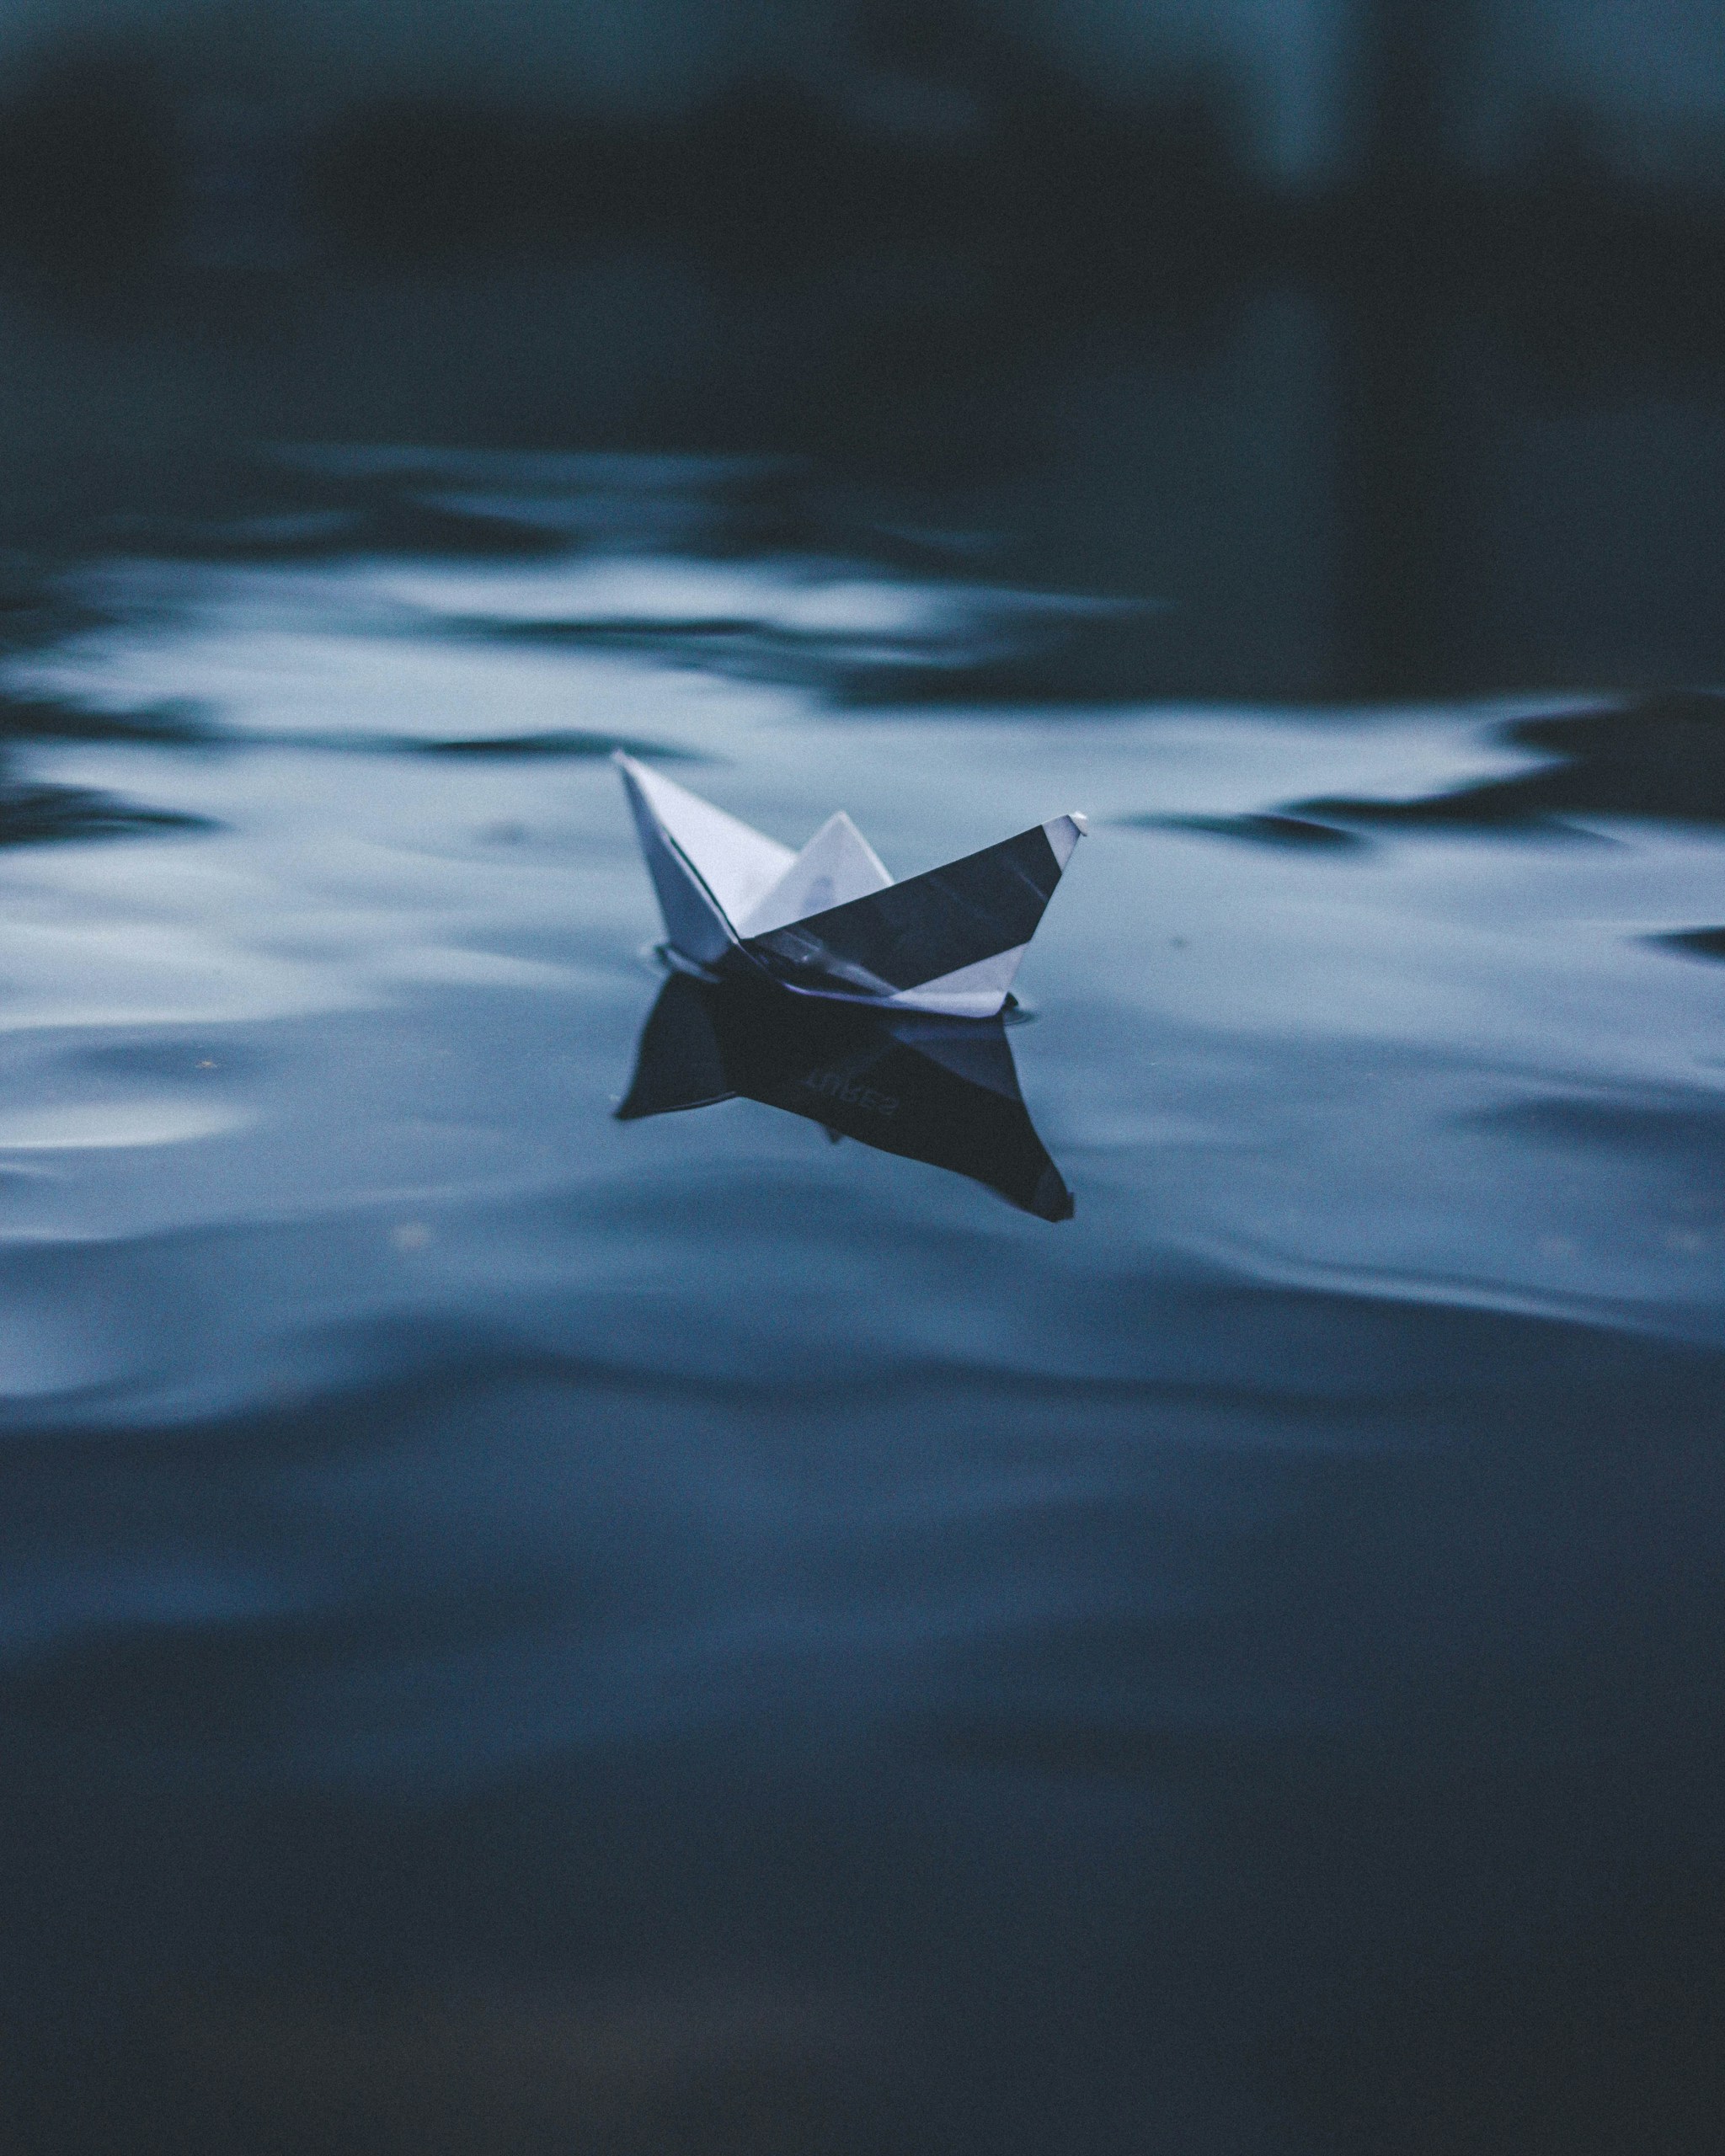 paper boat on body of water